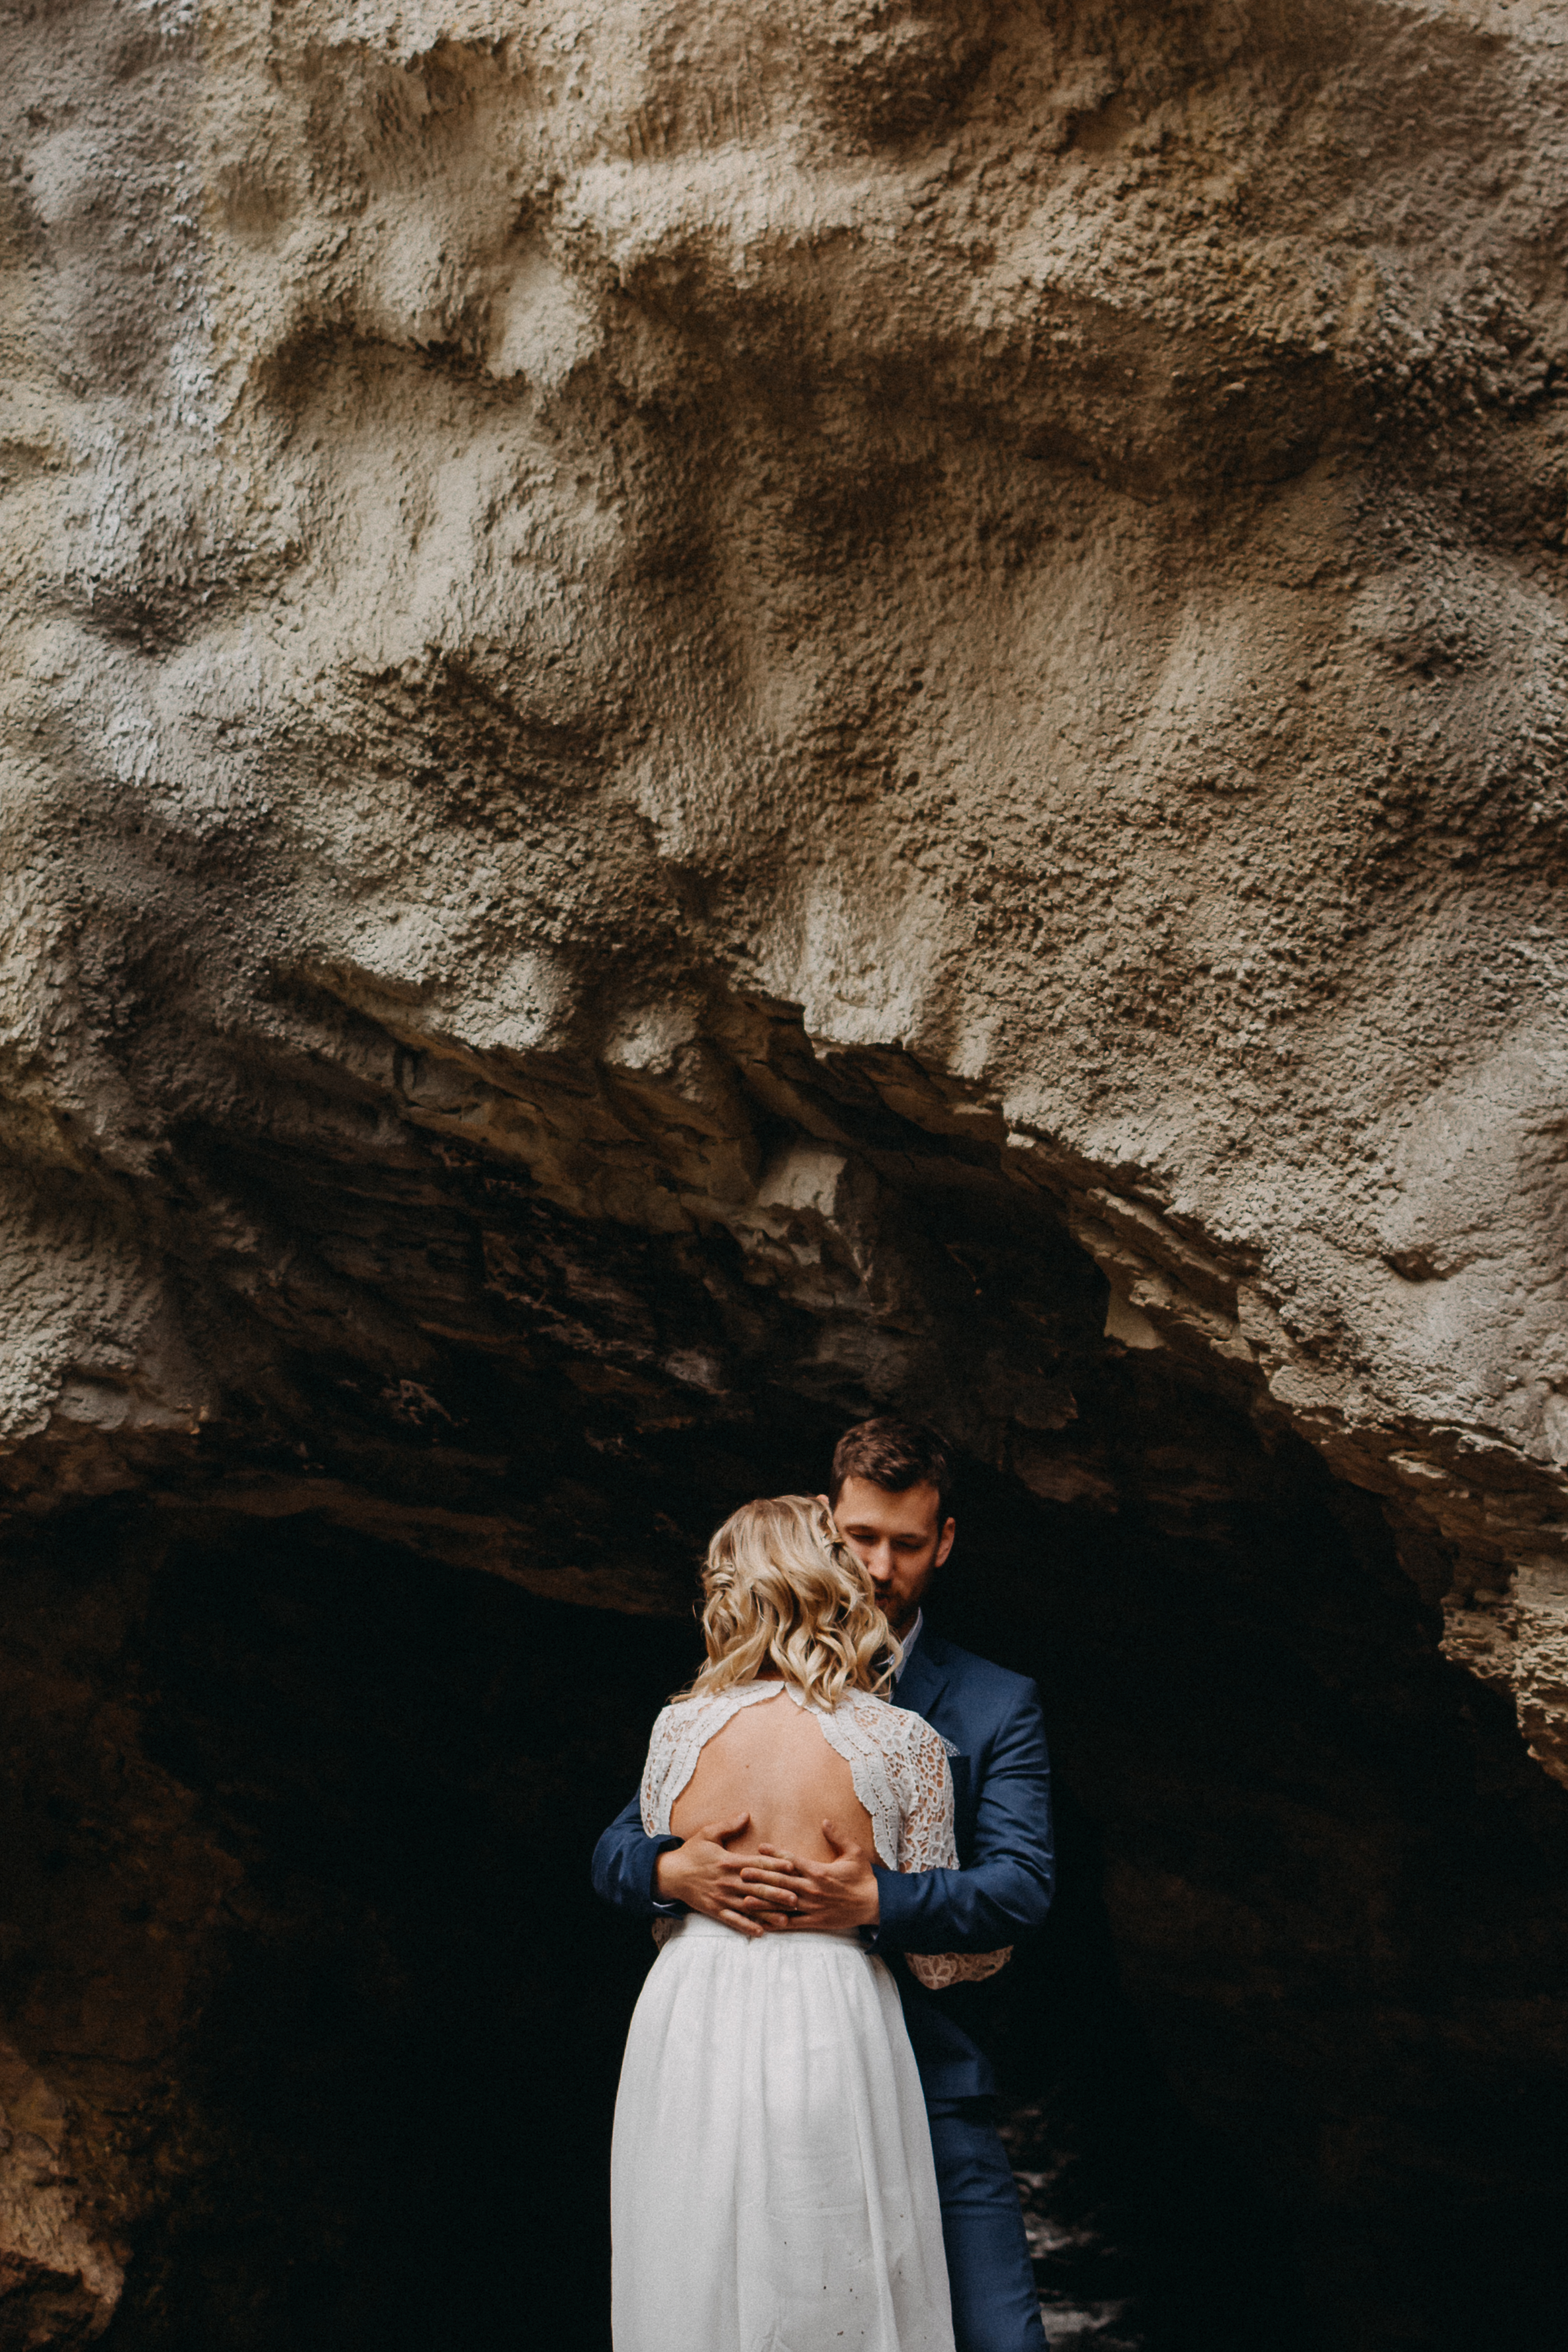 The bride and groom holding each other in front of a cave